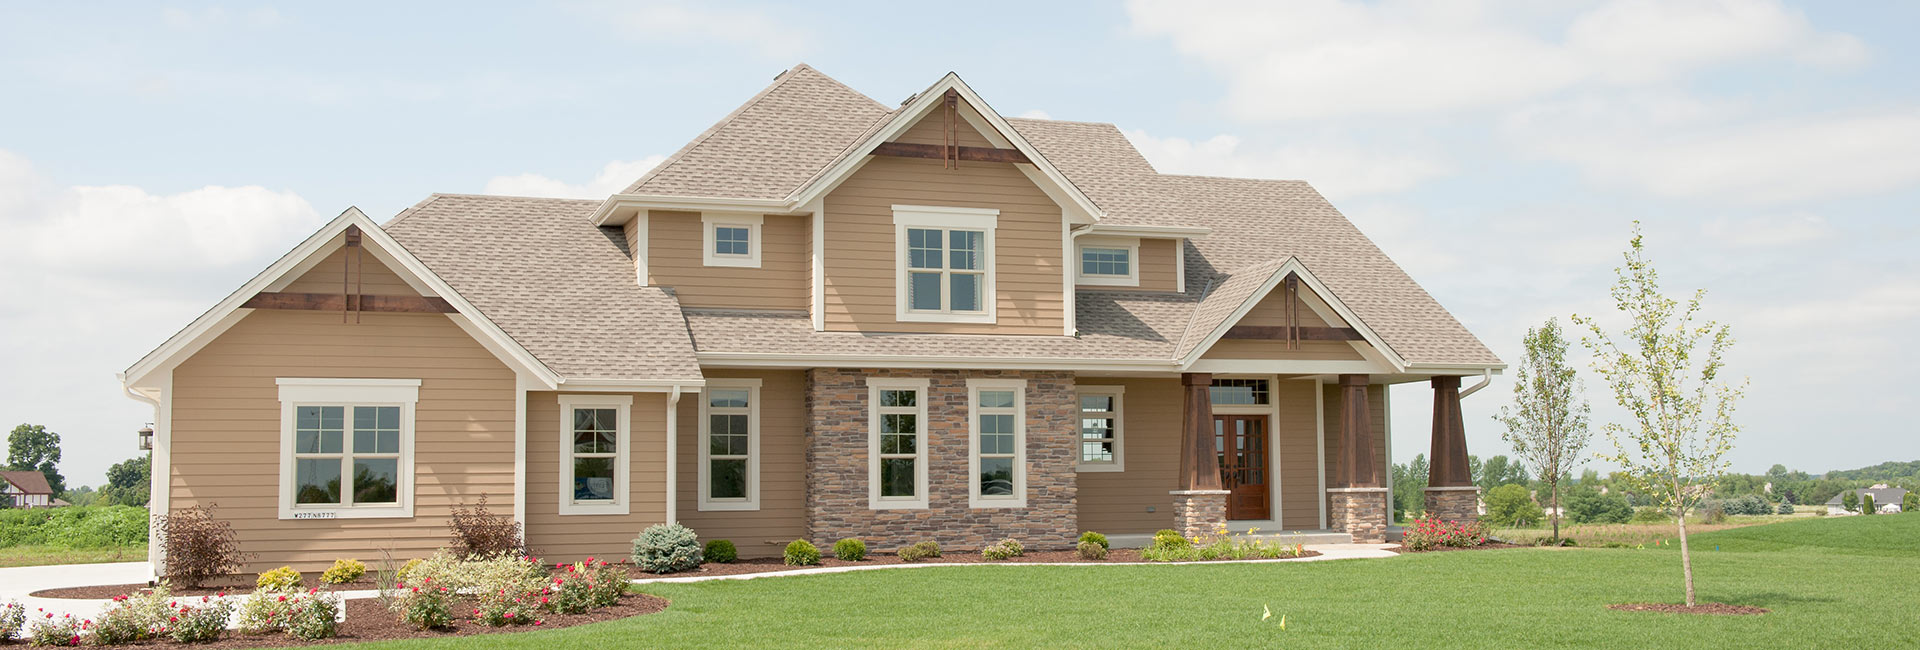 Front elevation of the Courtlynn model home